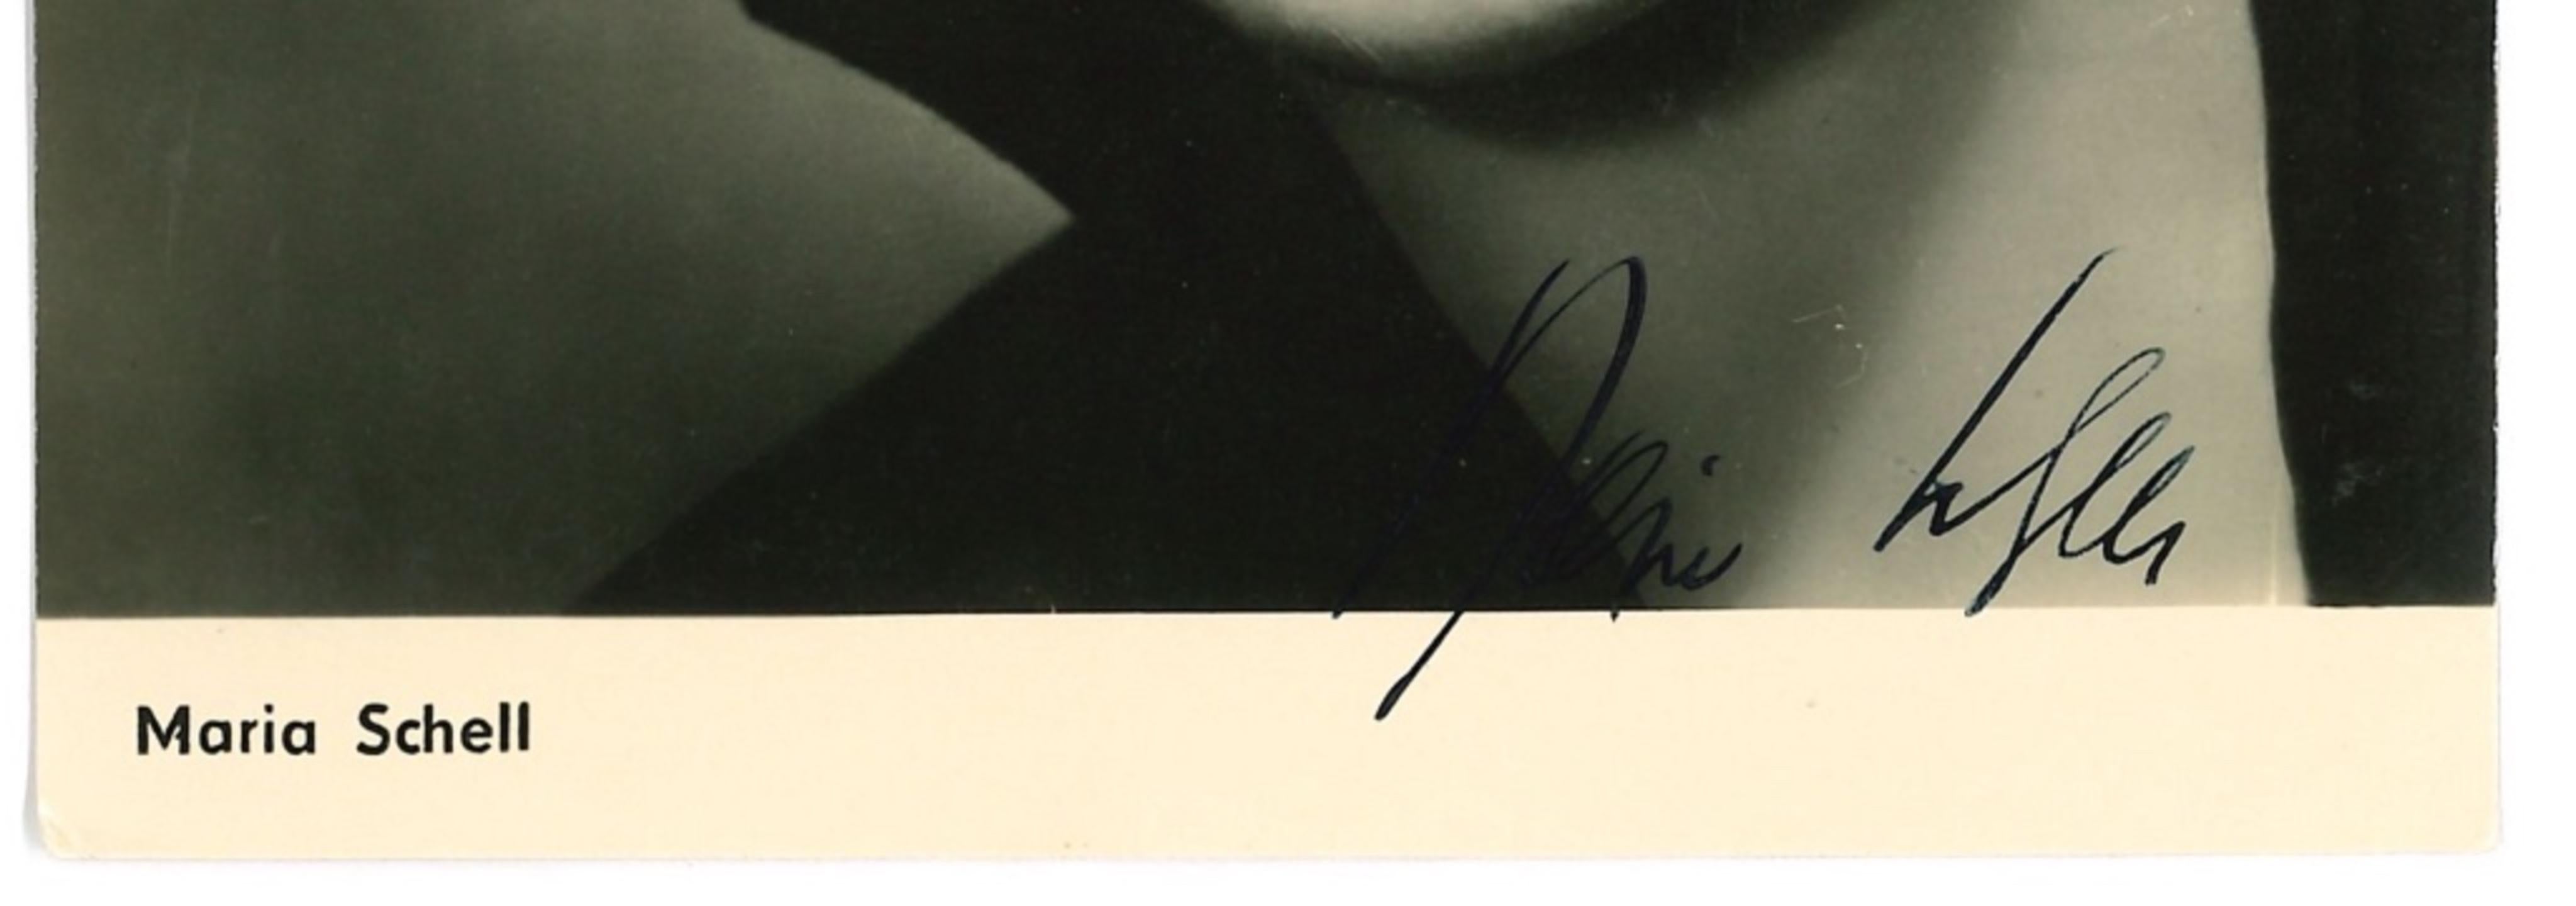 Autographed Portrait by Maria Schell - Vintage b/w Postcard - 1950s - Photograph by Unknown